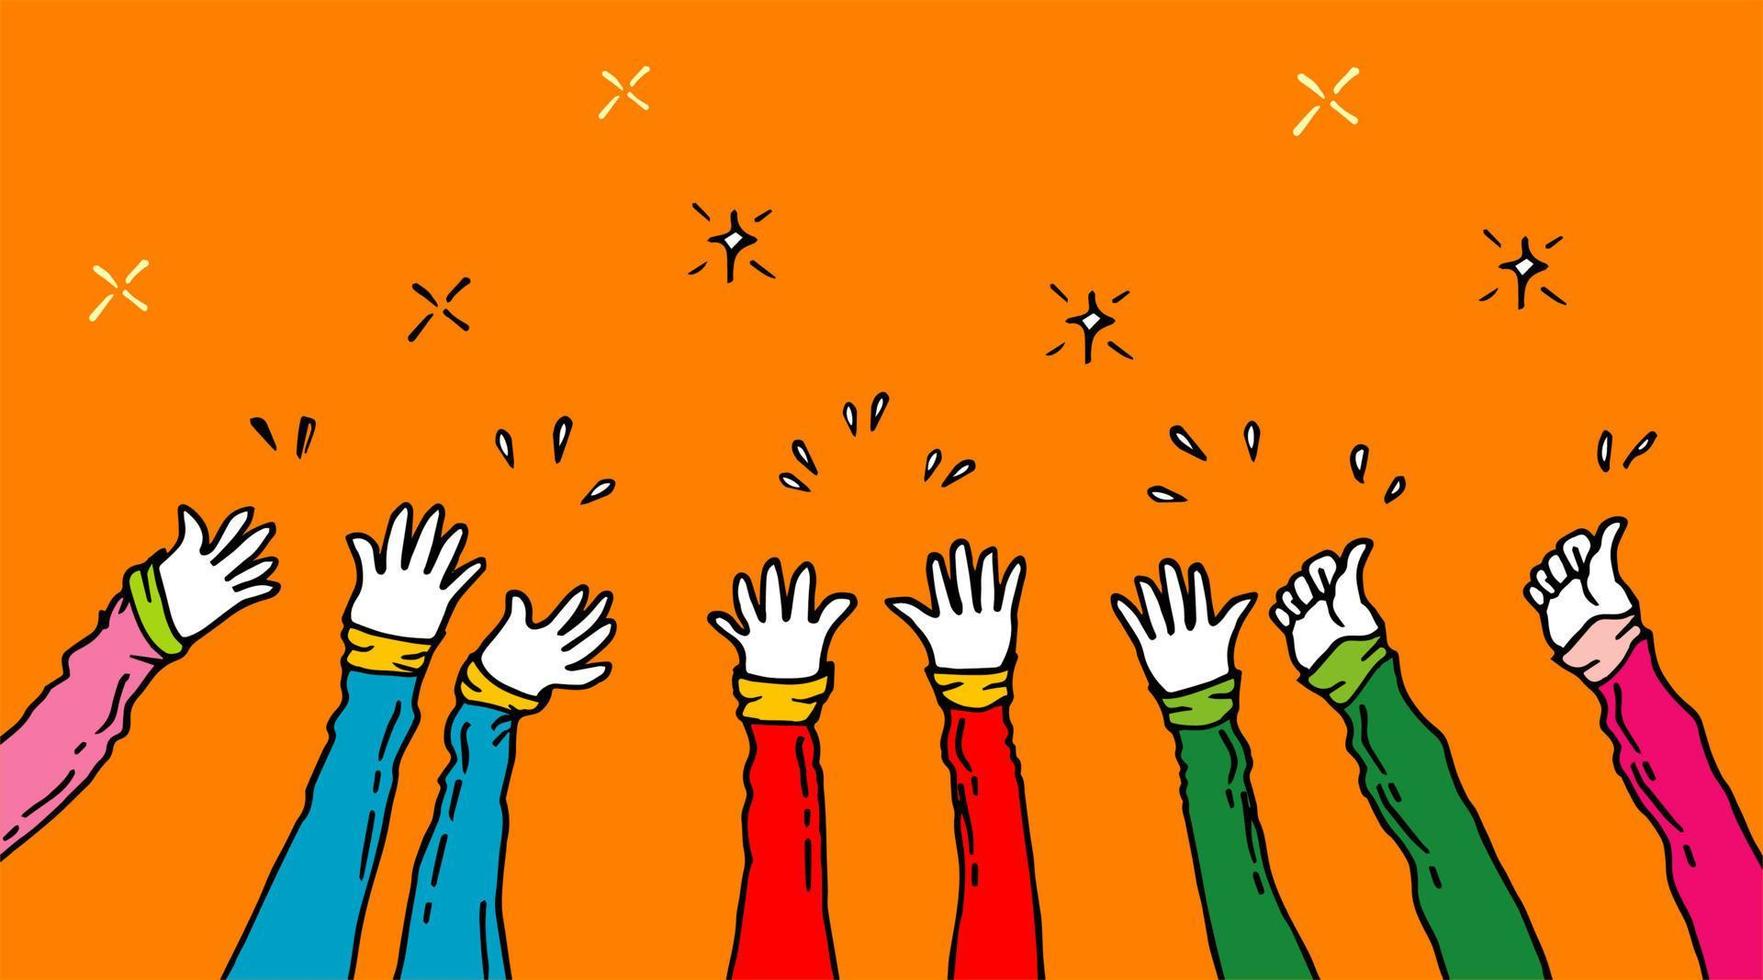 hands up applause hand draw. cartoon style with funny colors. vector illustration